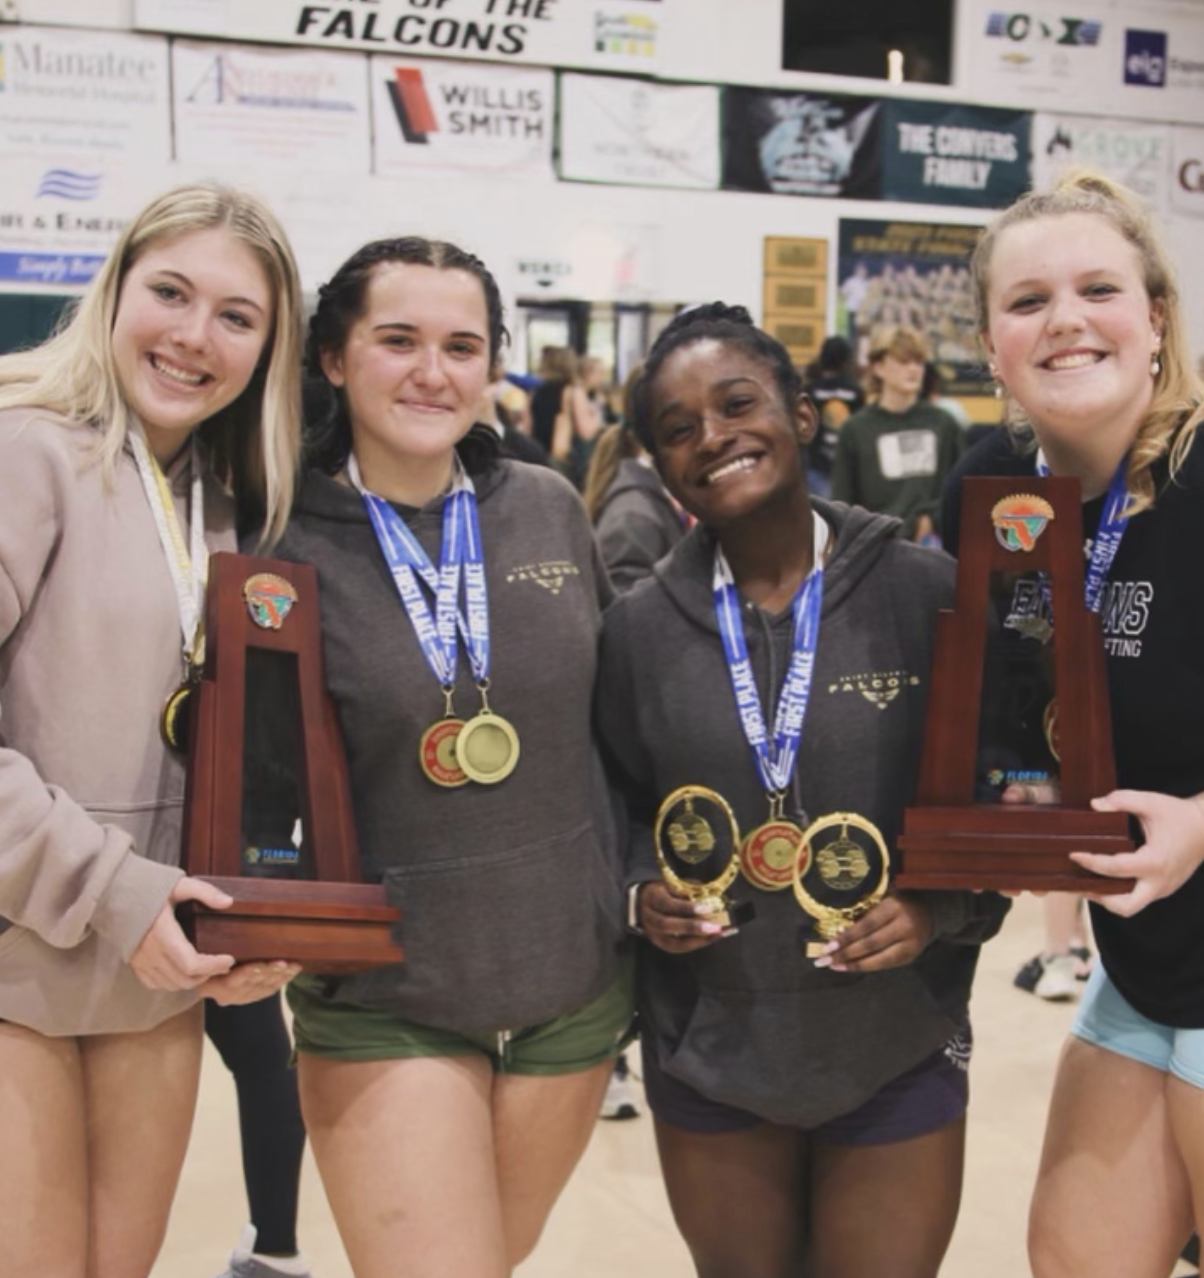 Girls+weightlifting+team+is+back-to-back+district+champs